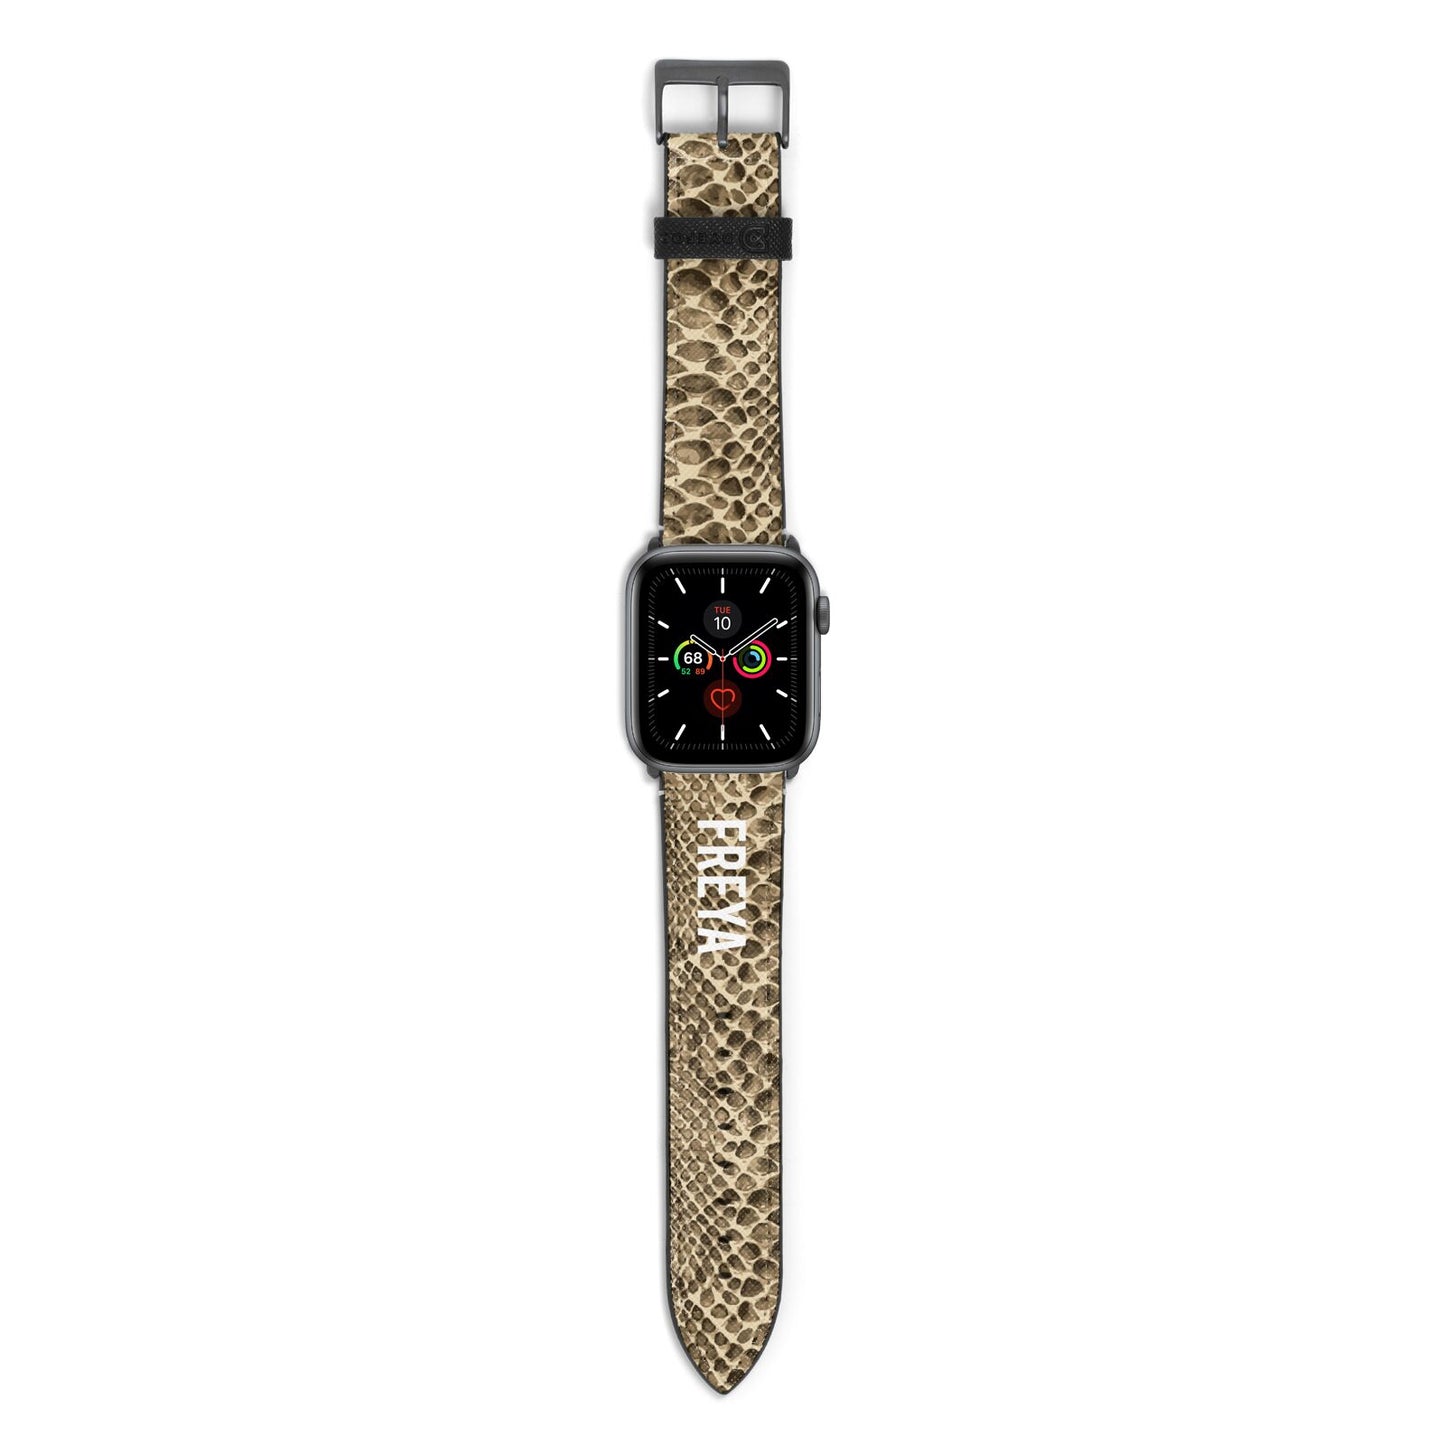 Personalised Tan Snakeskin Apple Watch Strap with Space Grey Hardware